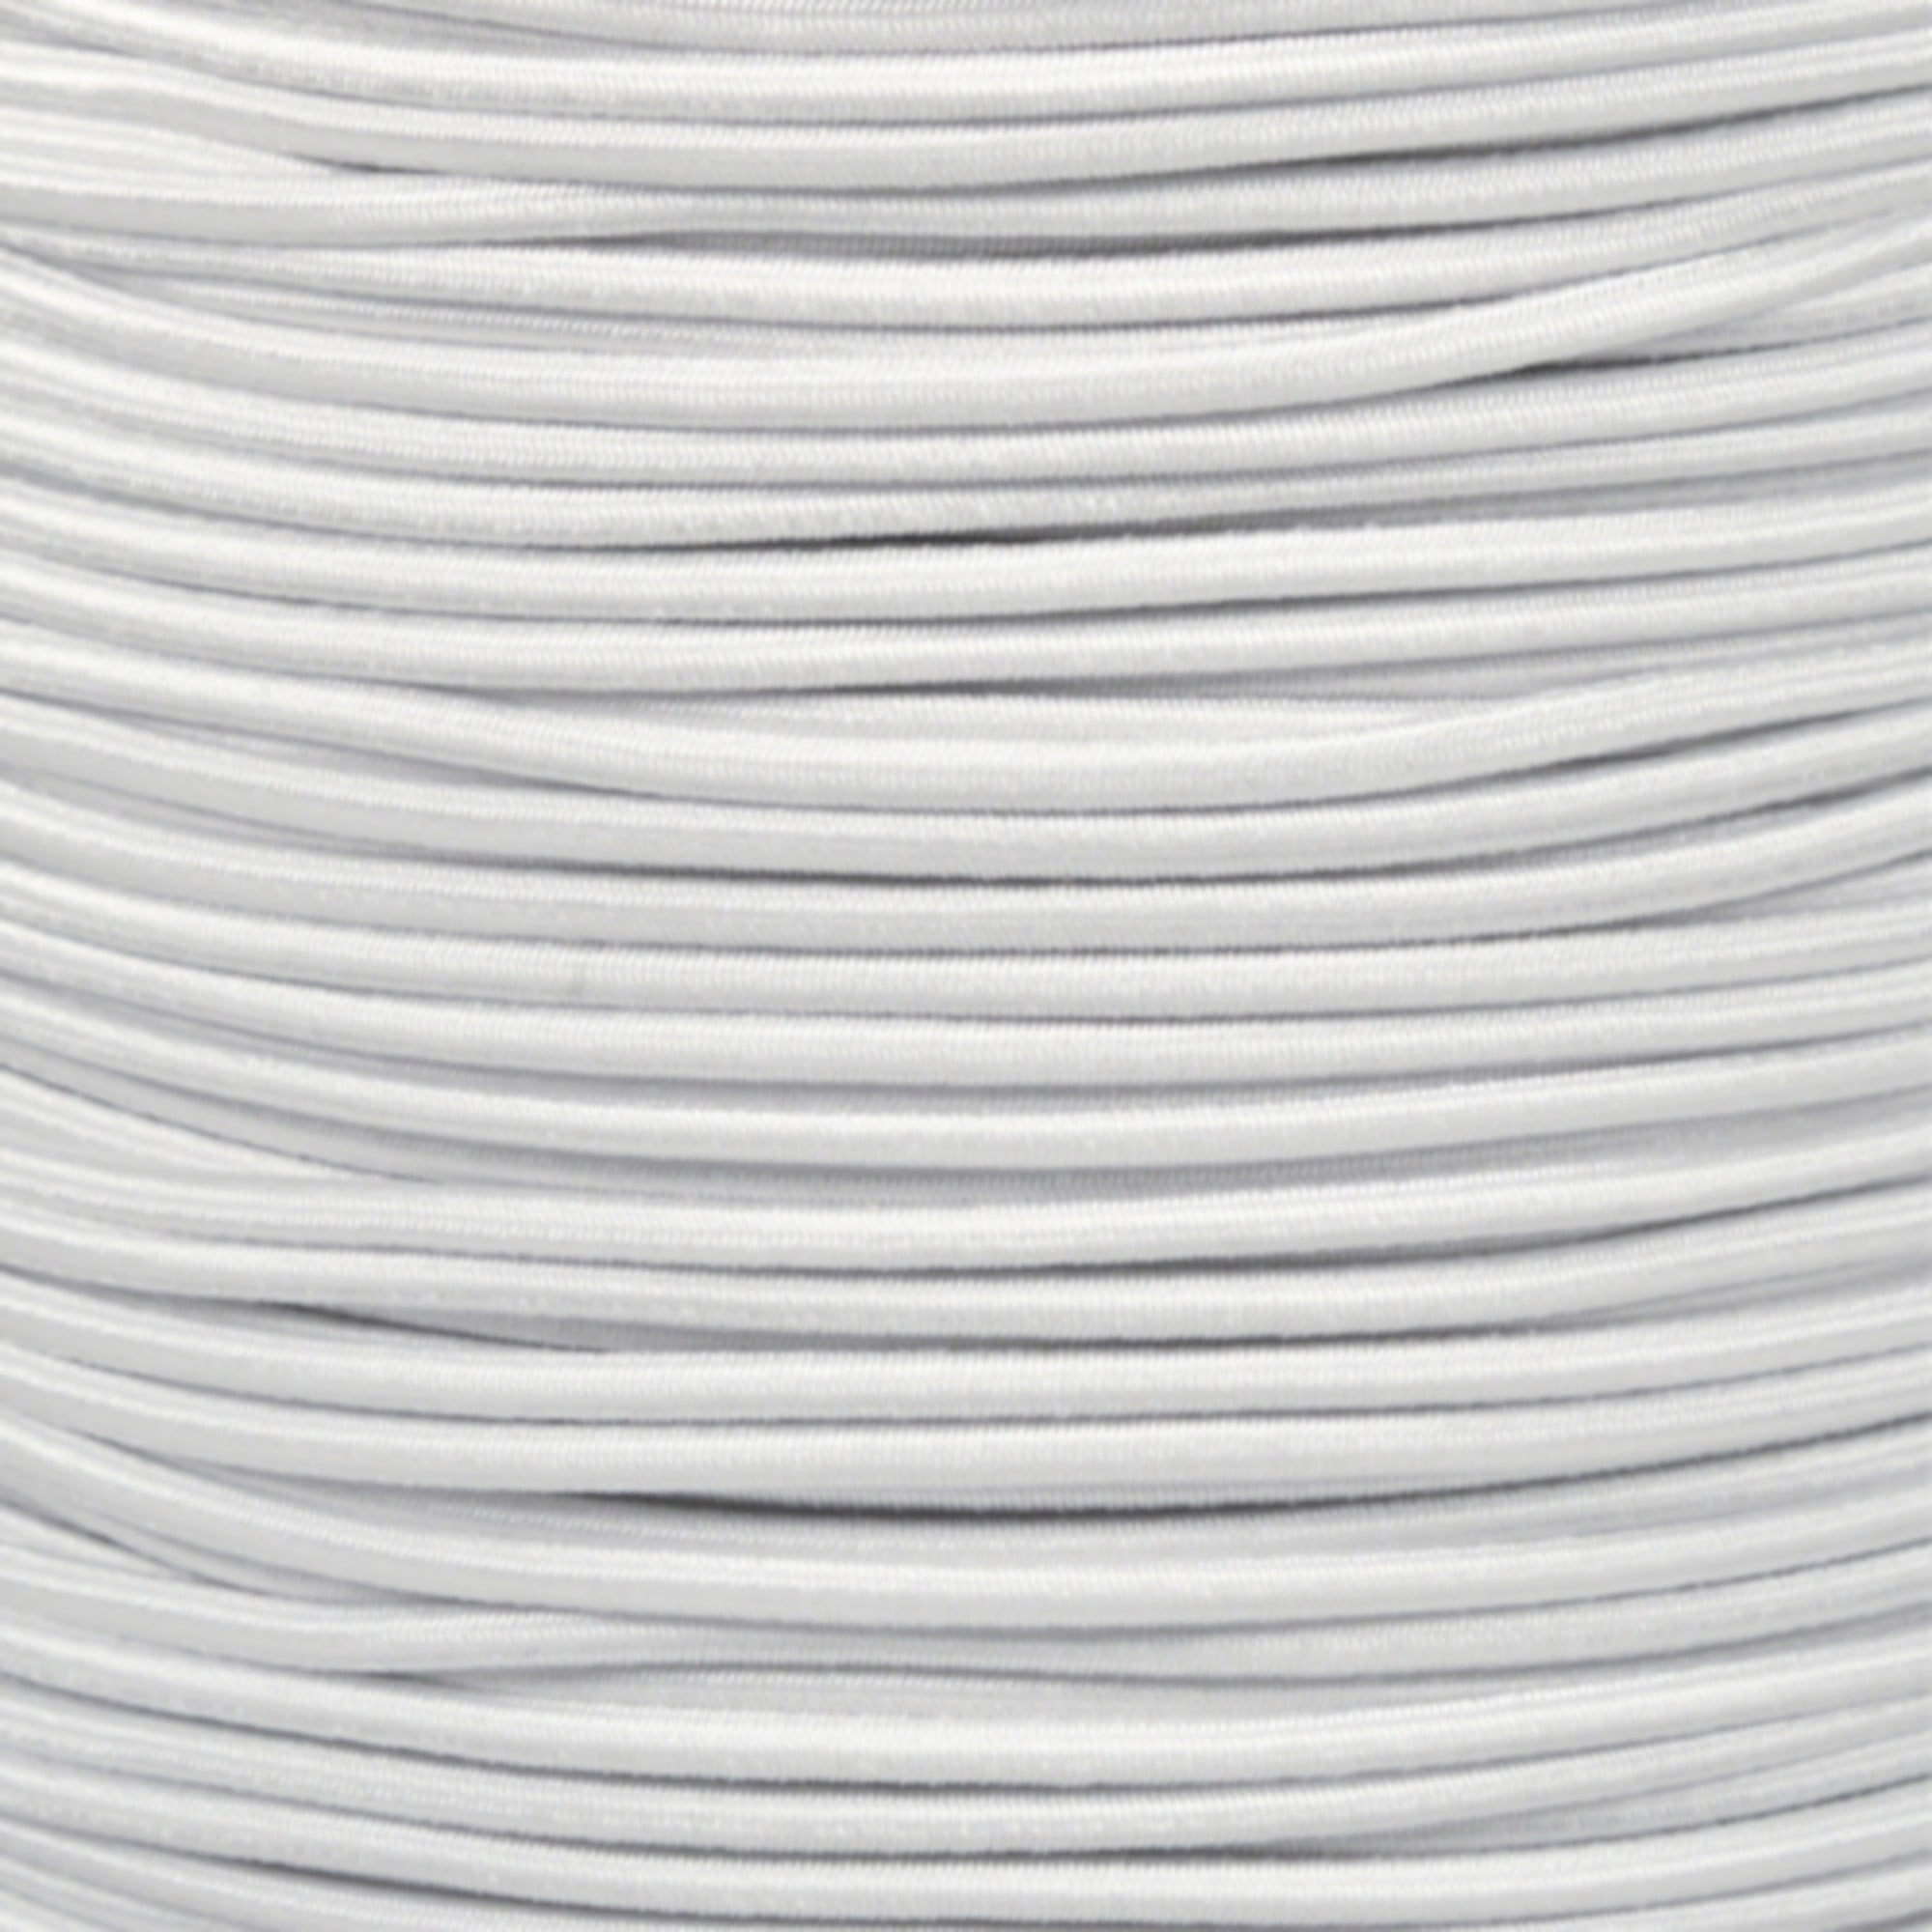 75ft 3/16" White Shock Cord Marine Grade Bungee Heavy Duty Tie Down Stretch Rope 